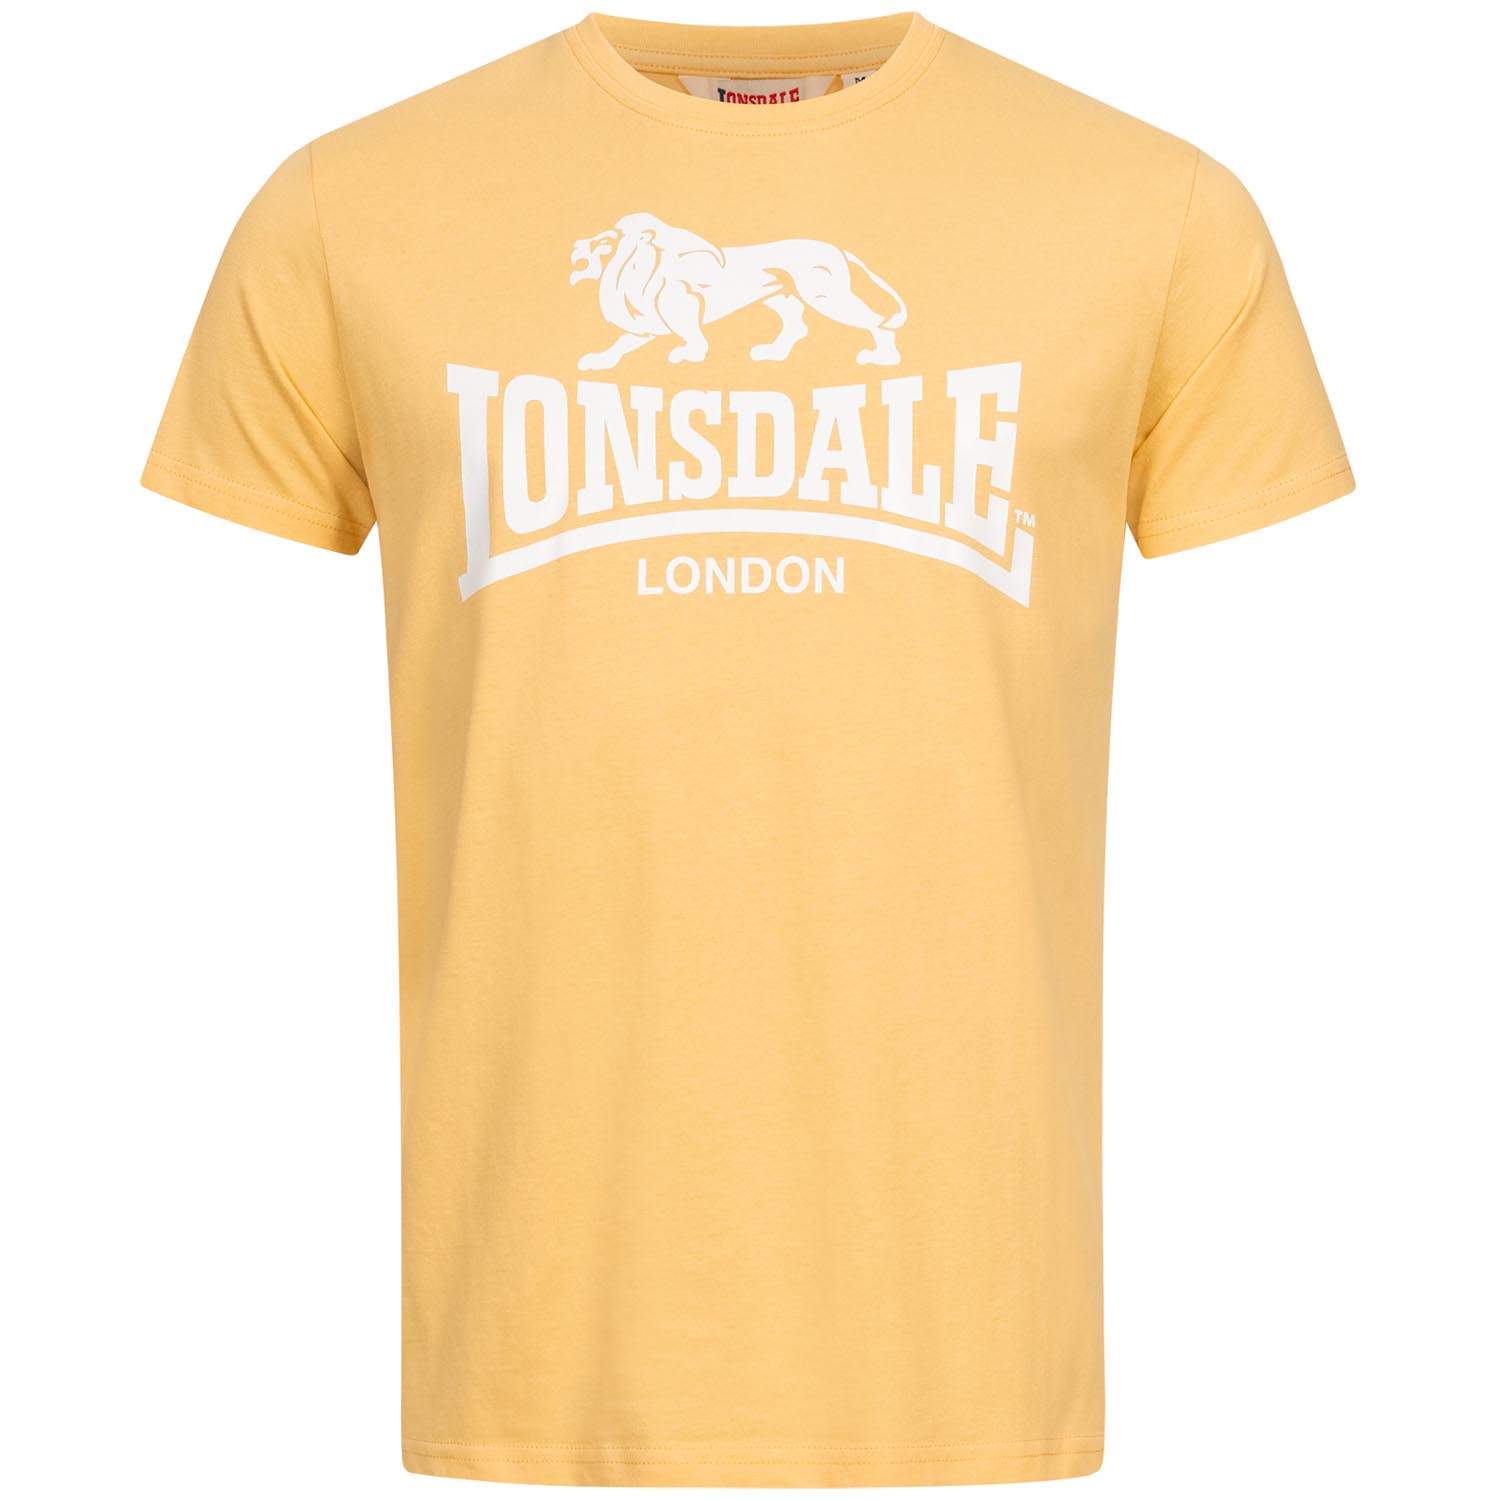 Lonsdale T-Shirt, St Erney, yellow